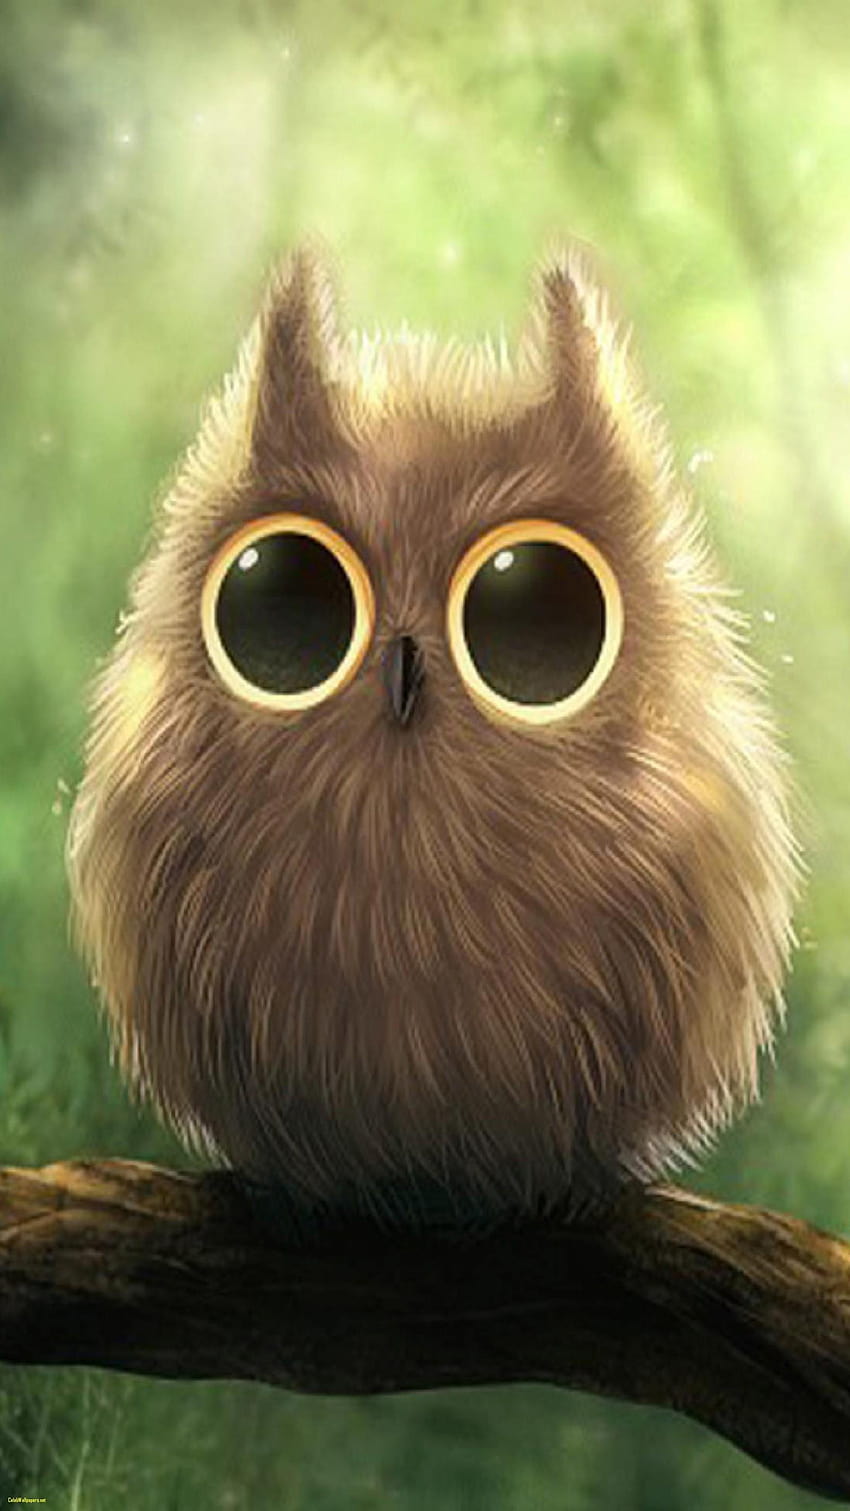 Premium AI Image | Whimsical Wonder FullSized Anime Drawing of a Little  Girl in a Cute Owl Suit